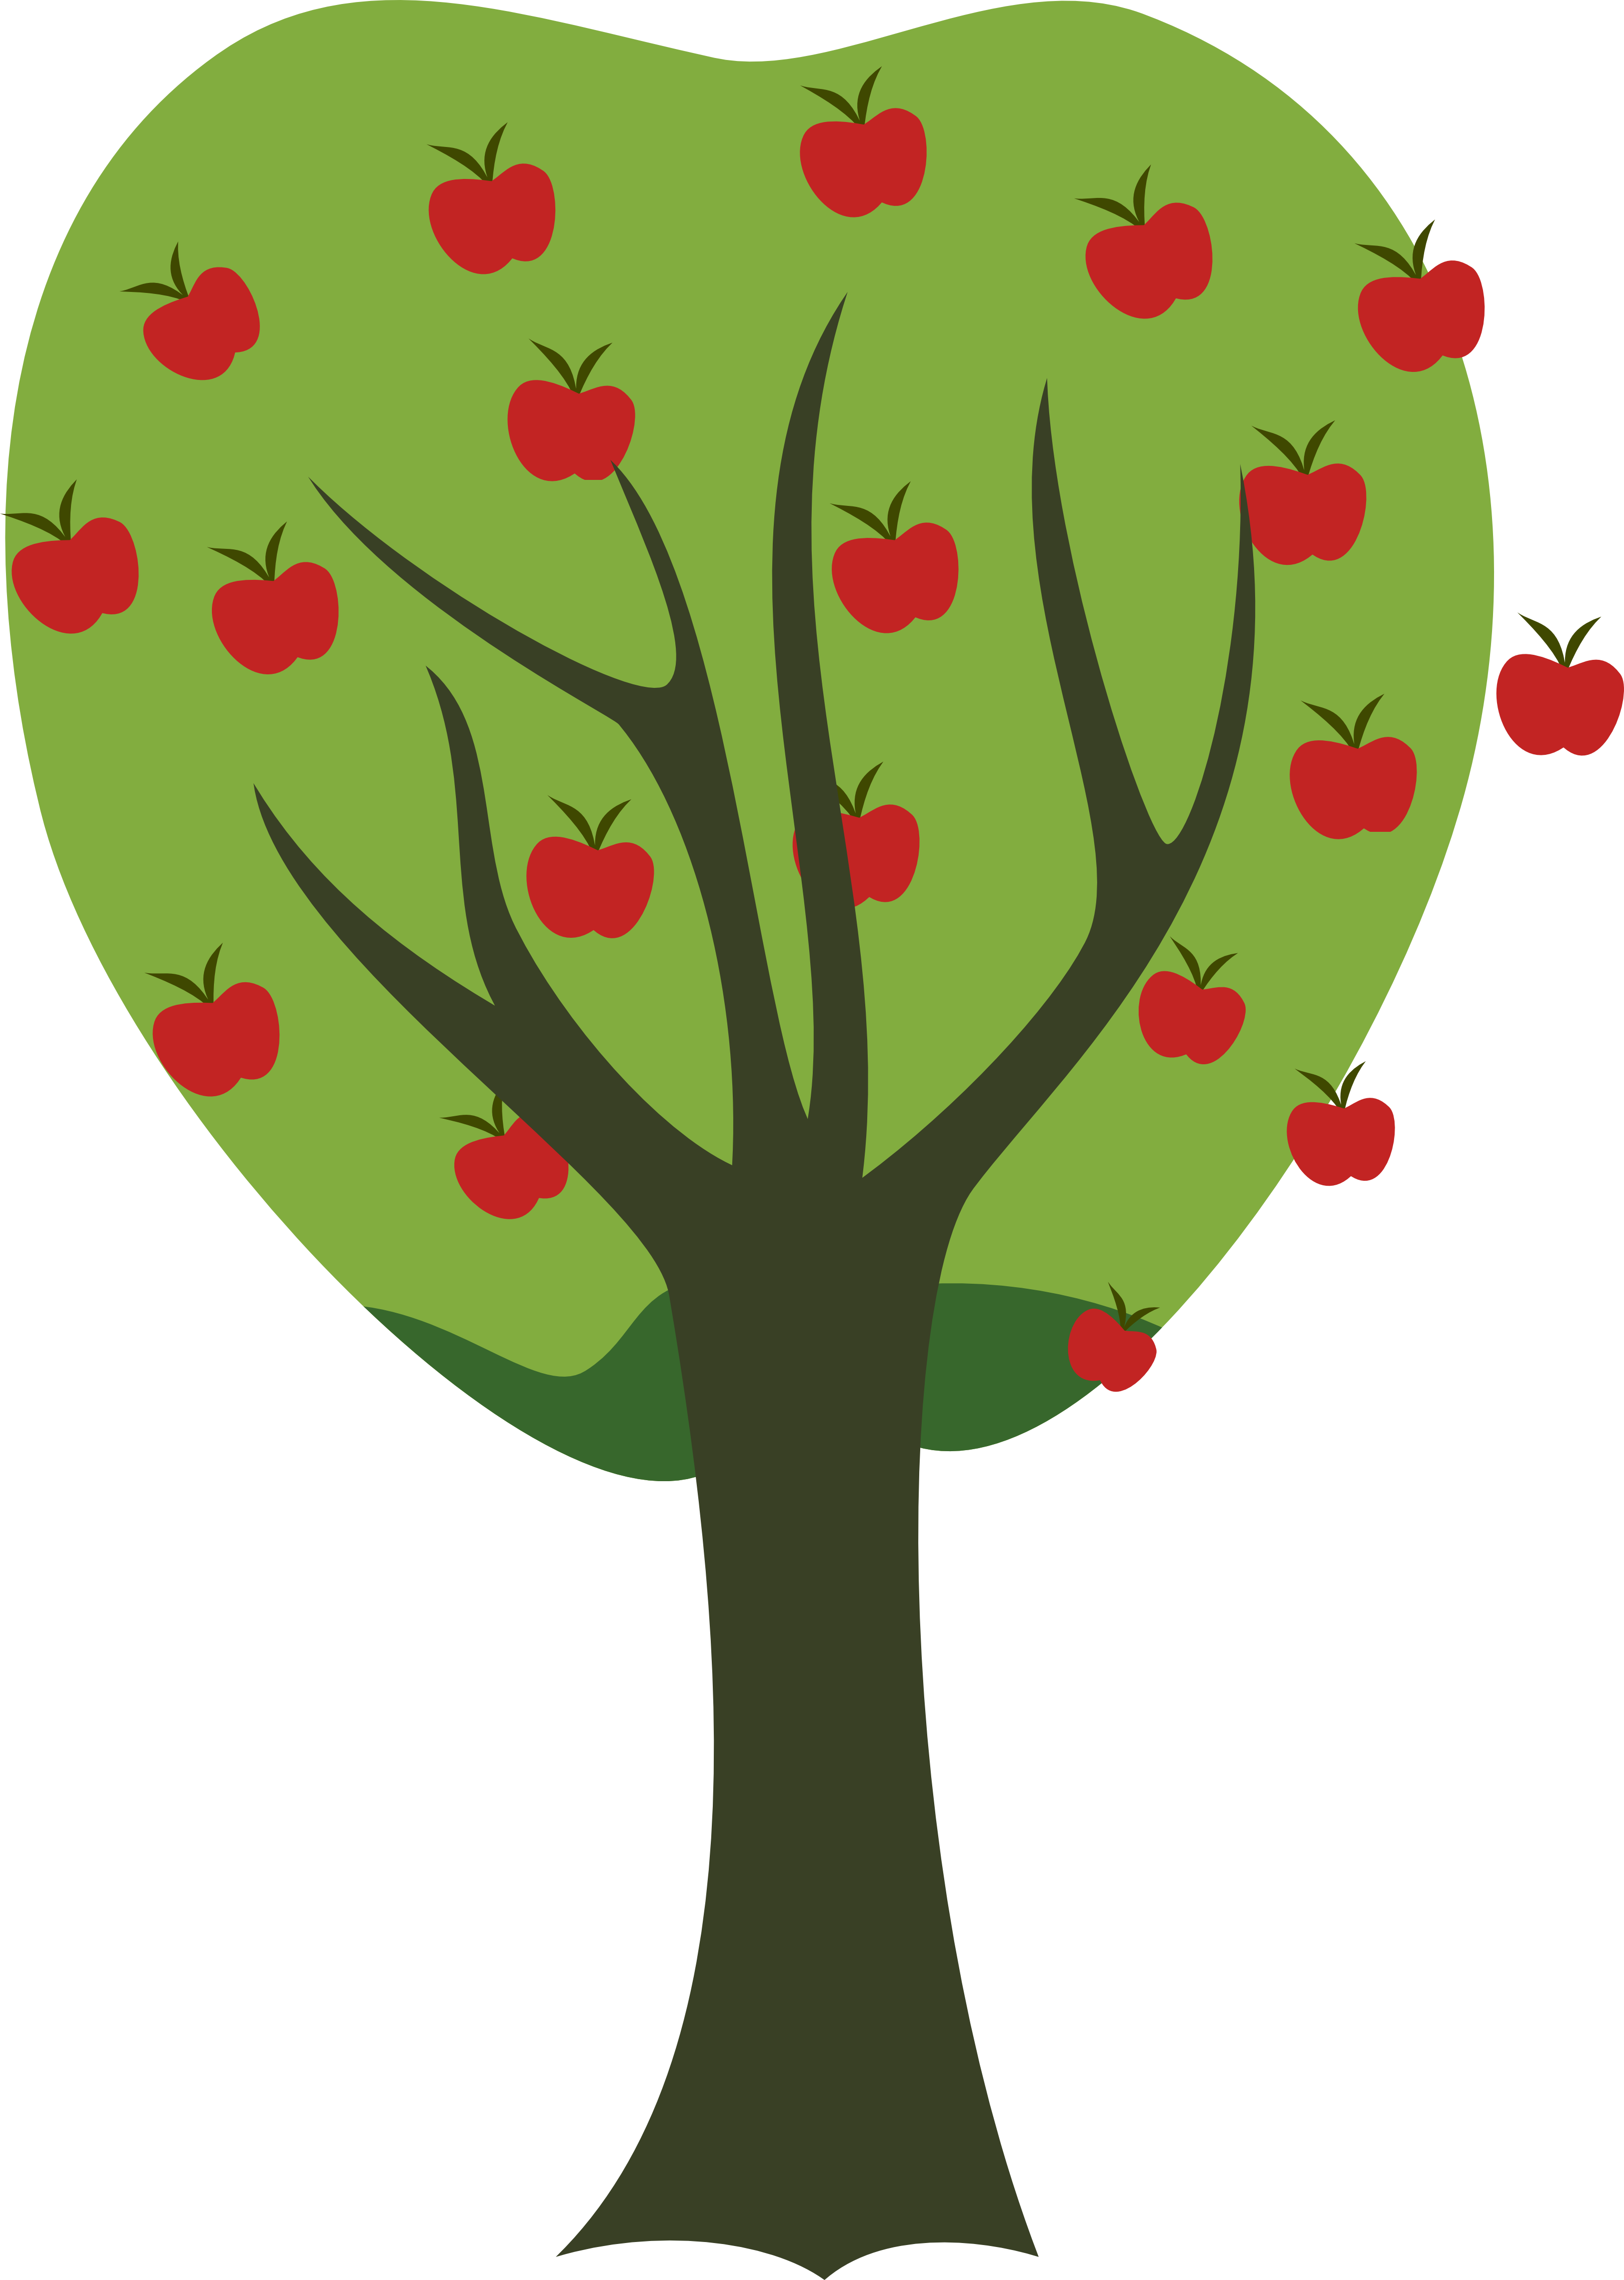 free clipart images apple tree - photo #31